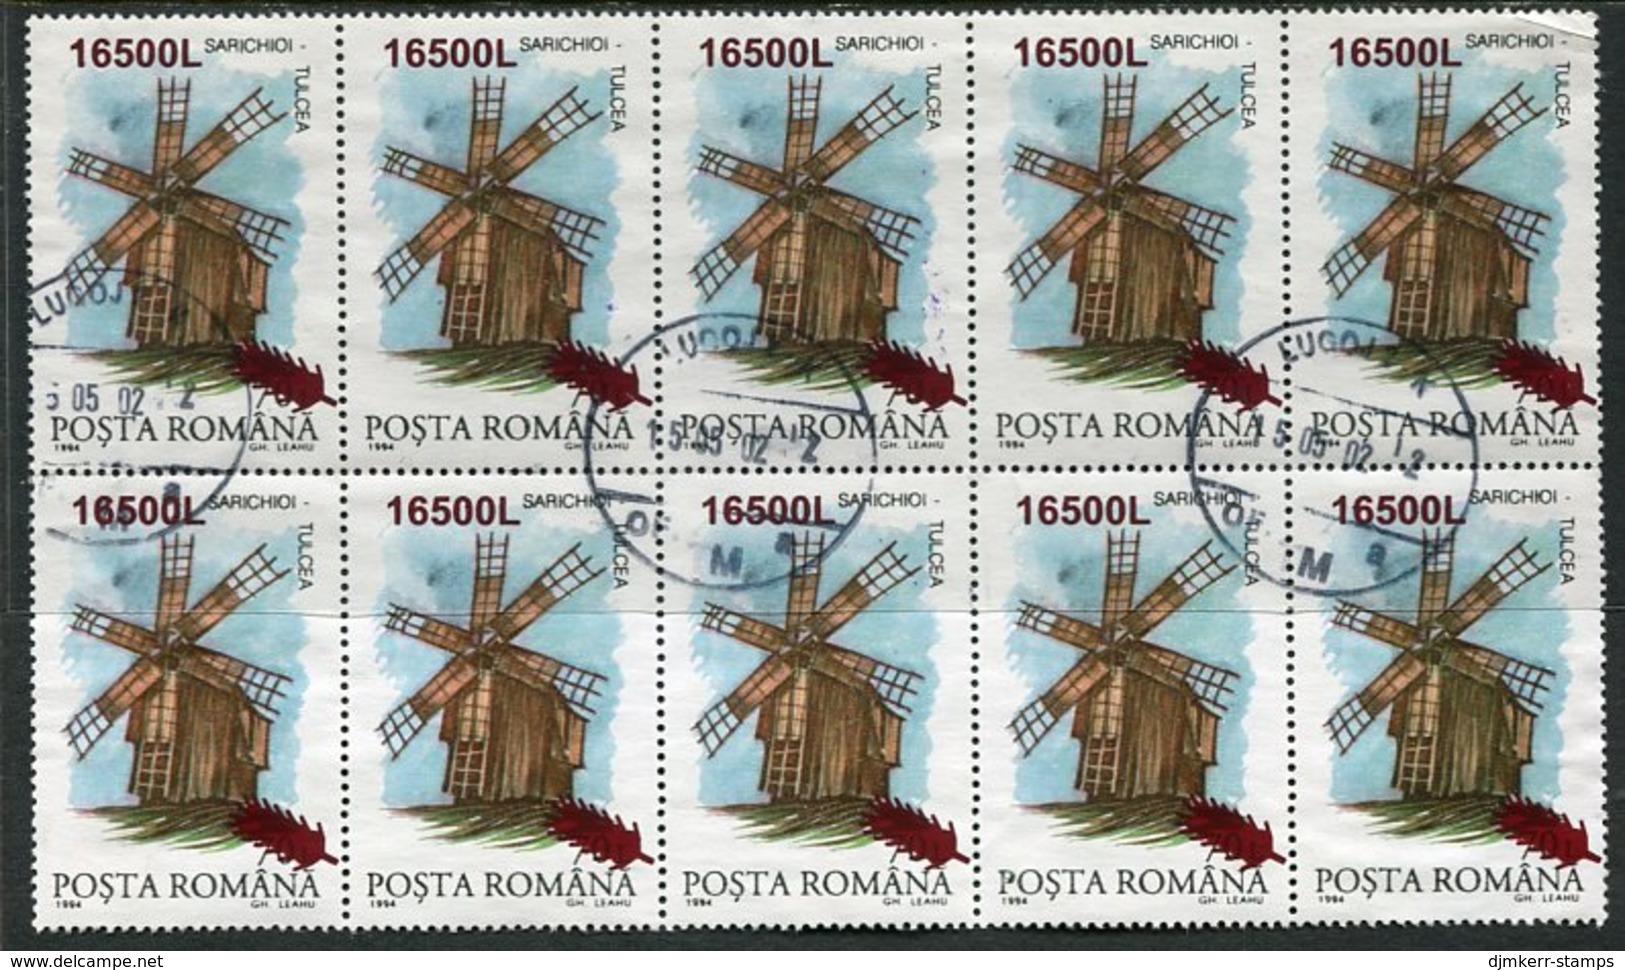 ROMANIA 2001 Windmill 70 L. Surcharged 16500 Block Of 10 Used.  Michel 5559 - Usado